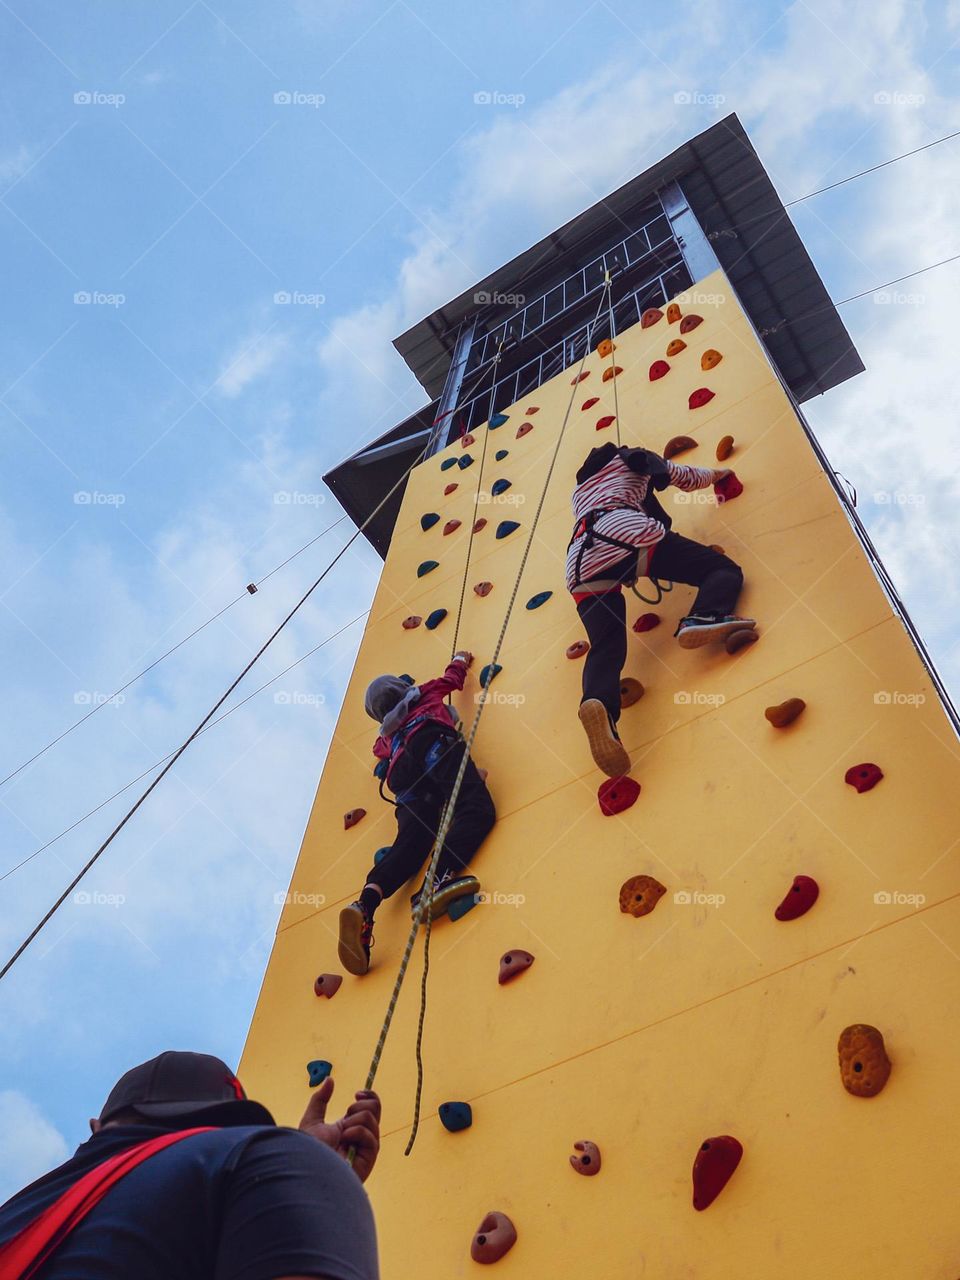 Two girls climbing the outdoor tower against blue sky